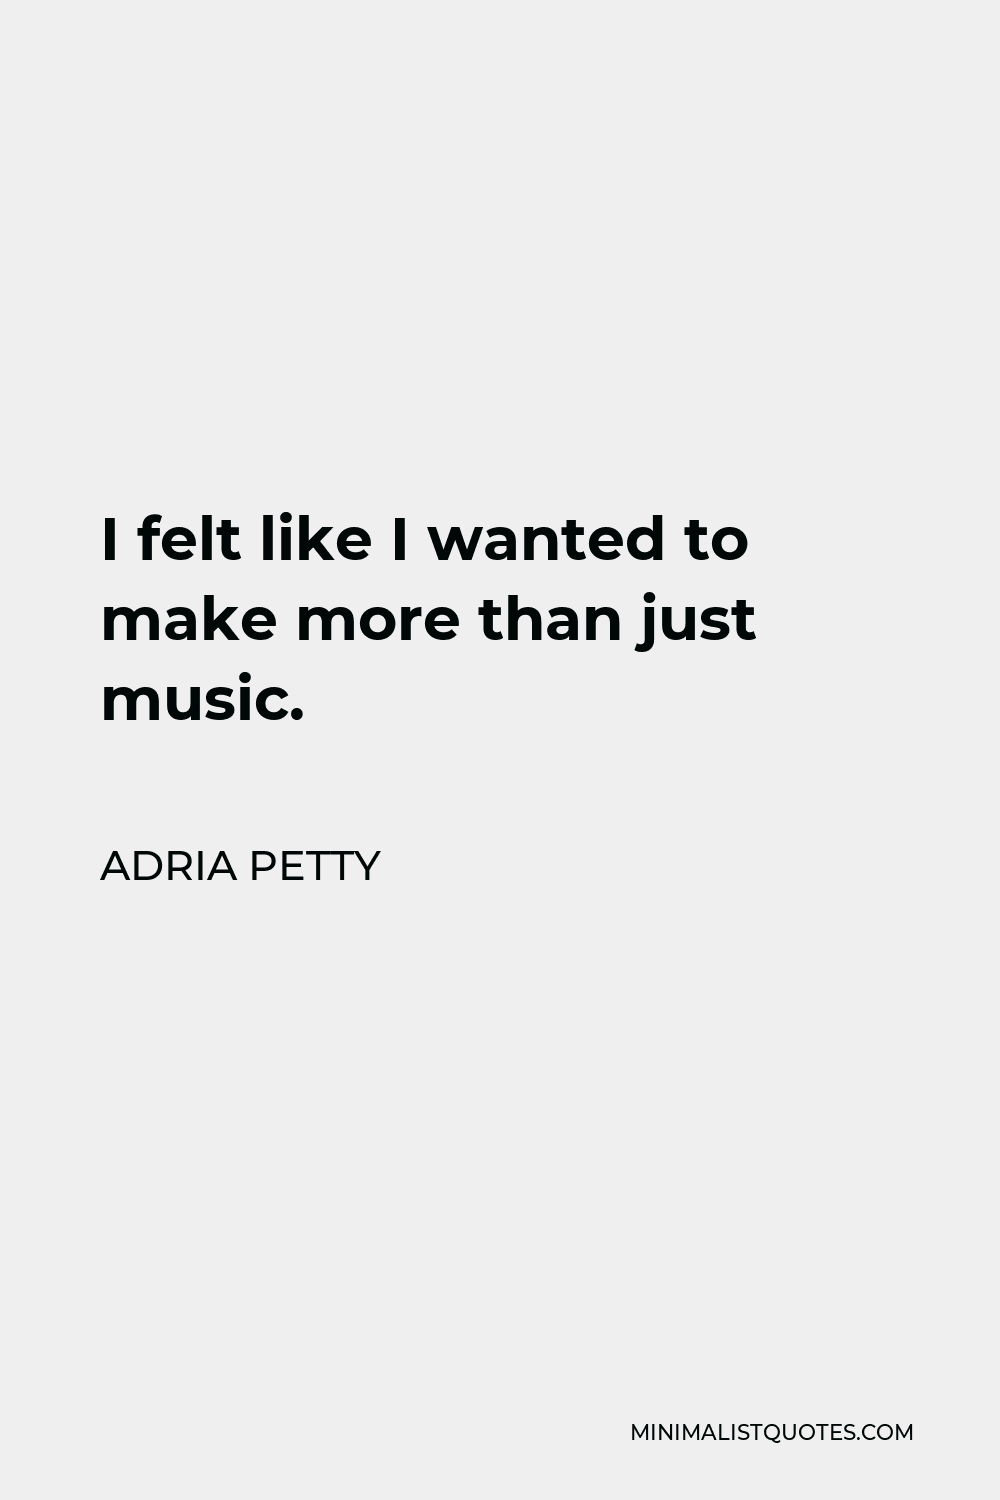 Adria Petty Quote - I felt like I wanted to make more than just music.